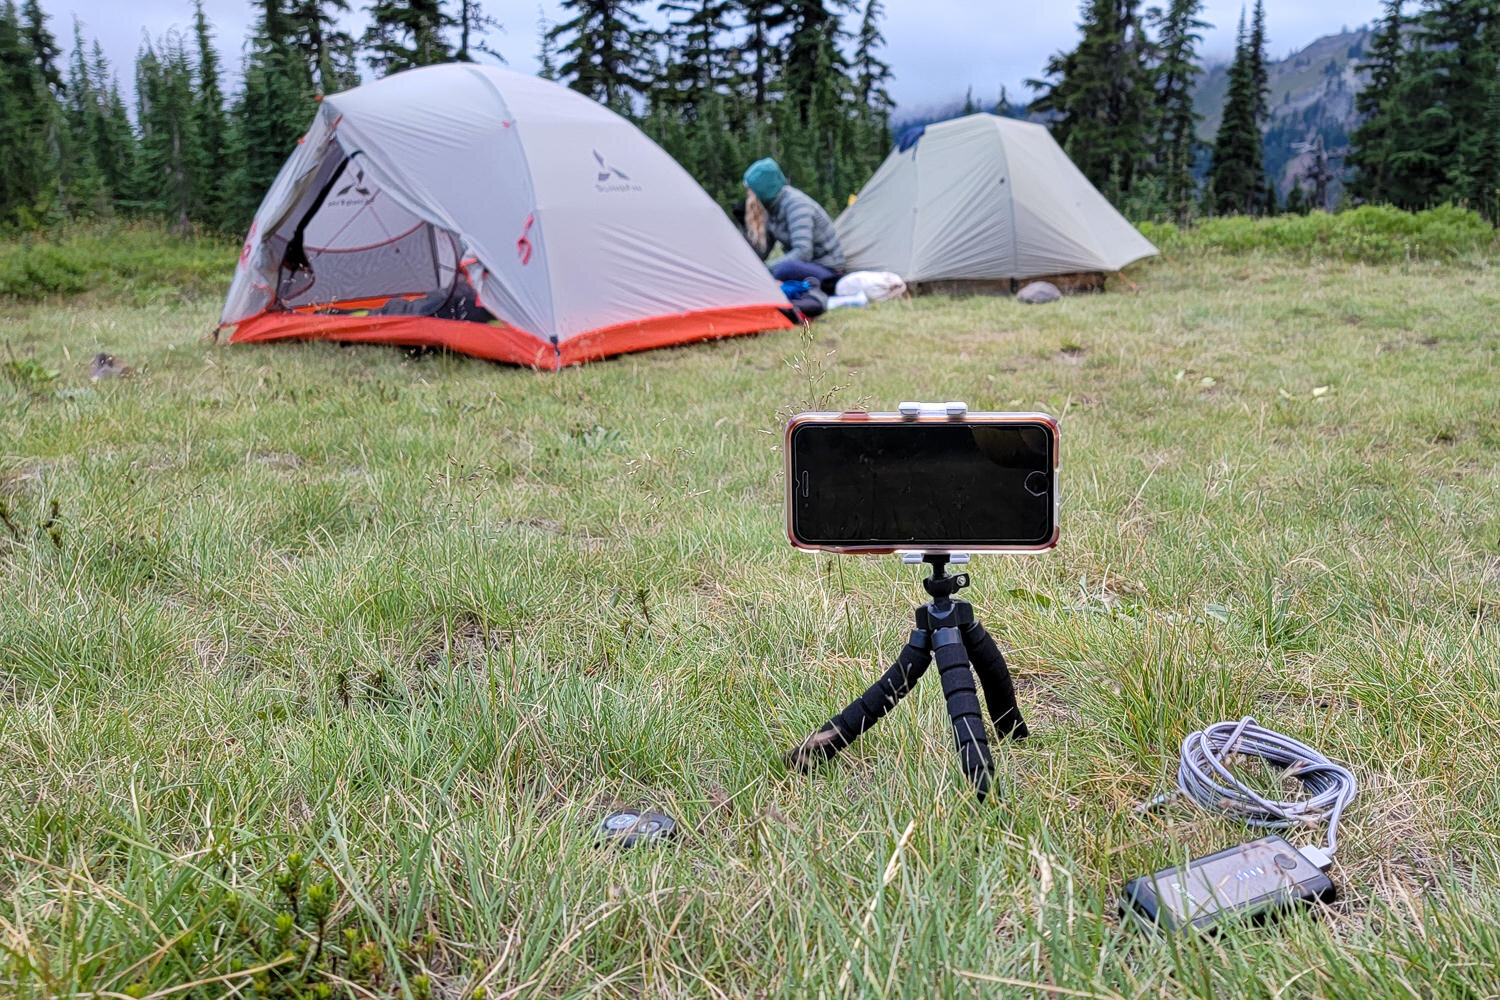 Gear list: Phone or Camera, Holster, Tripod, Remote, cloth, Waterproof case, Power bank, and a Short charging cable